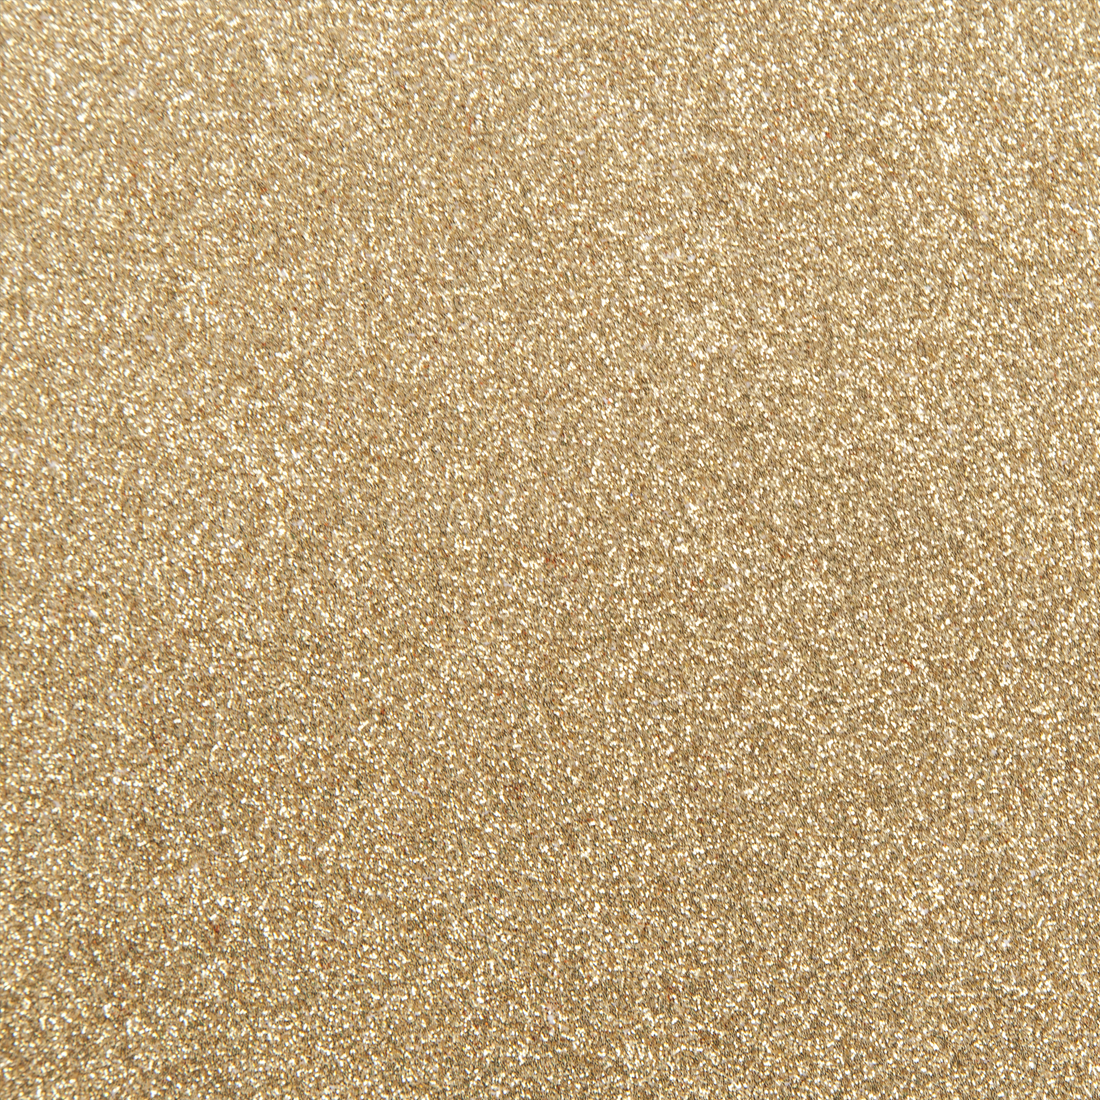  Best Creation 12-Inch by 12-Inch Glitter Cardstock, Gold  (GCS010)